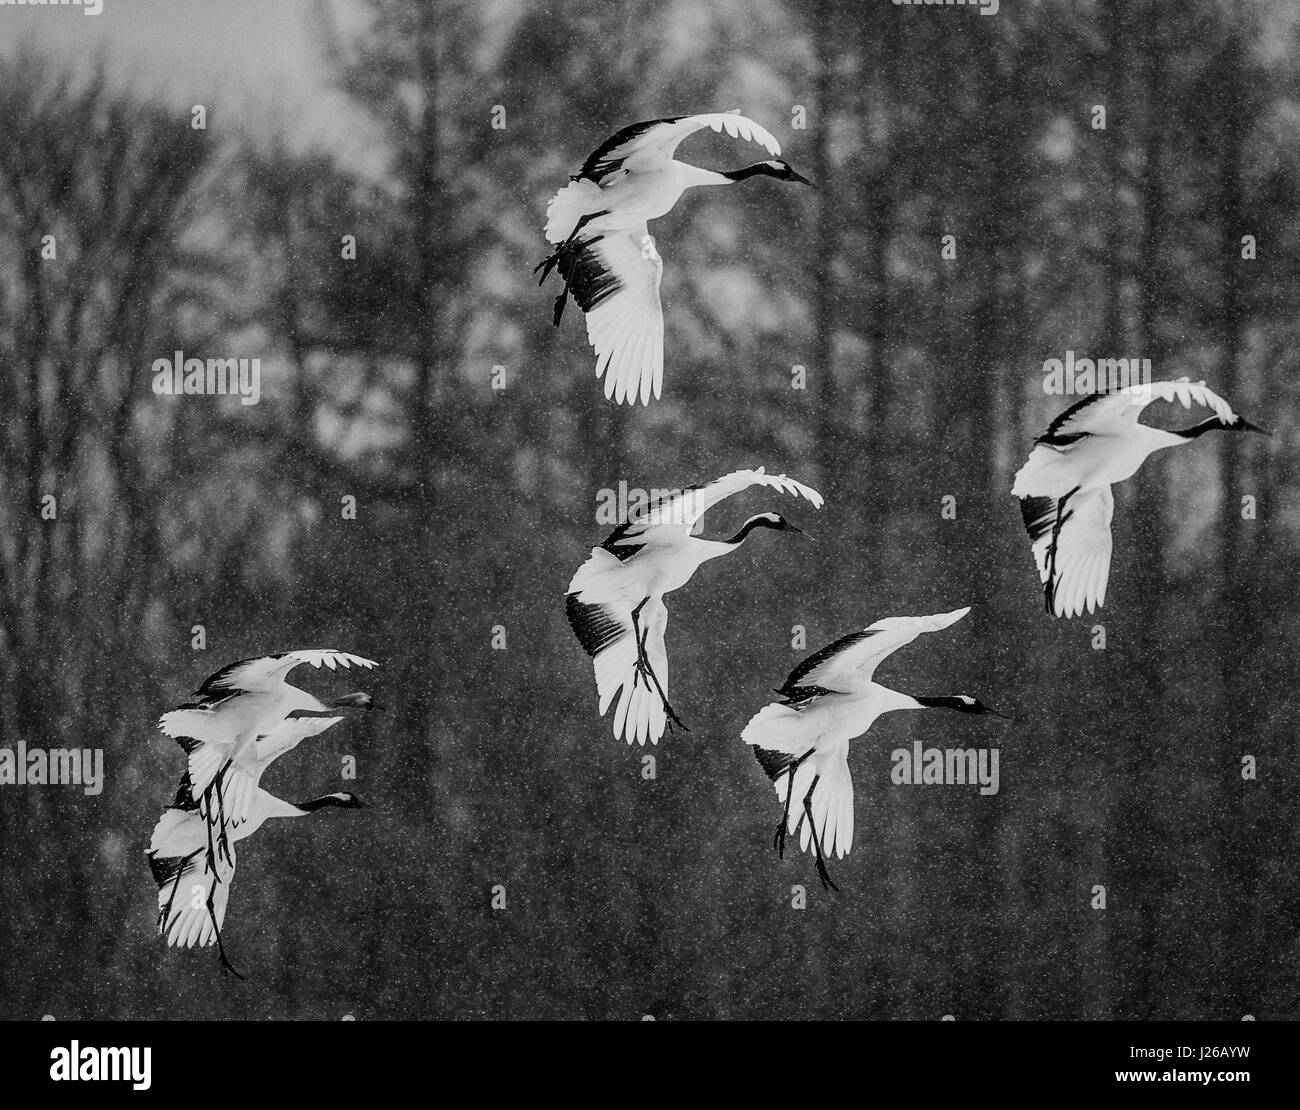 A group of Japanese cranes flying in a snow blizzard. Japan. Hokkaido. Tsurui. Great illustration. Stock Photo